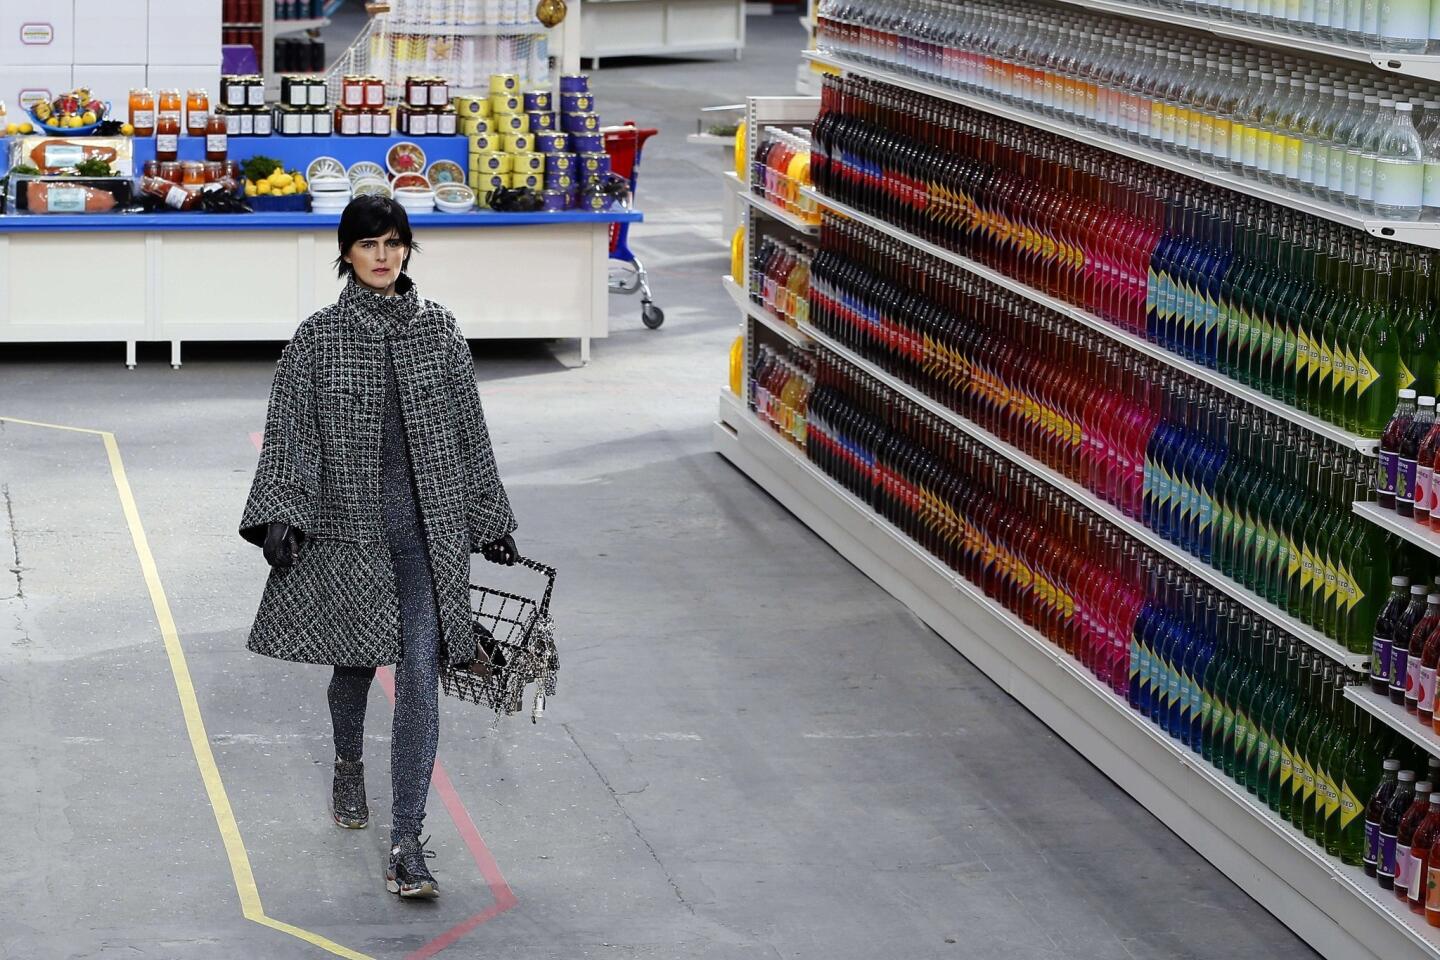 Chanel's Fashion Show Took Place in a Supermarket